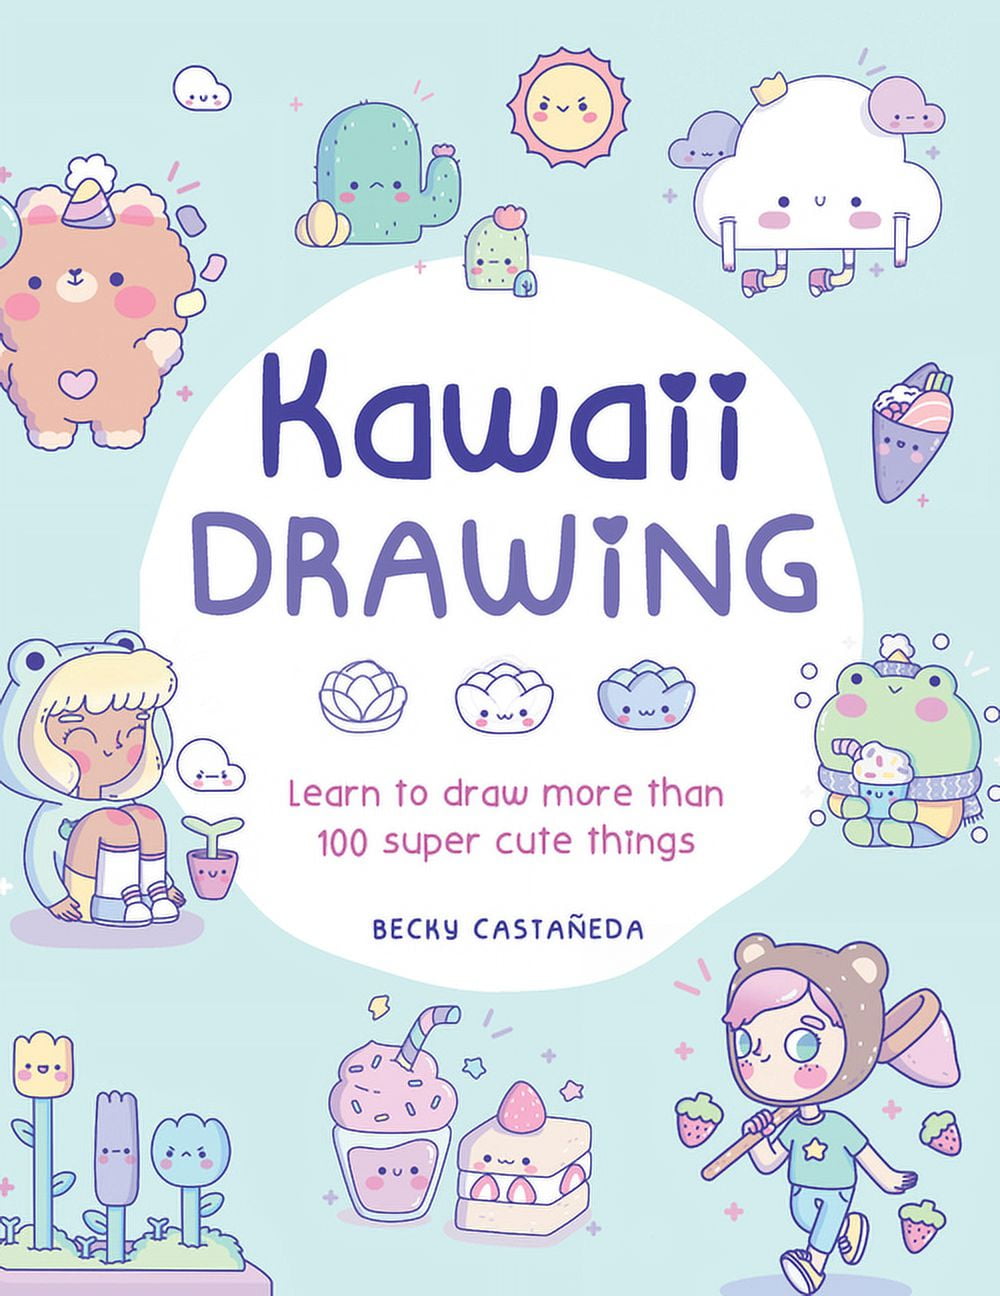 Faber-Castell Kawaii World - Learn to Draw Kawaii Drawing Book, How to Draw  Cute Doodles, Arts and Crafts for Teens and Adult Beginners